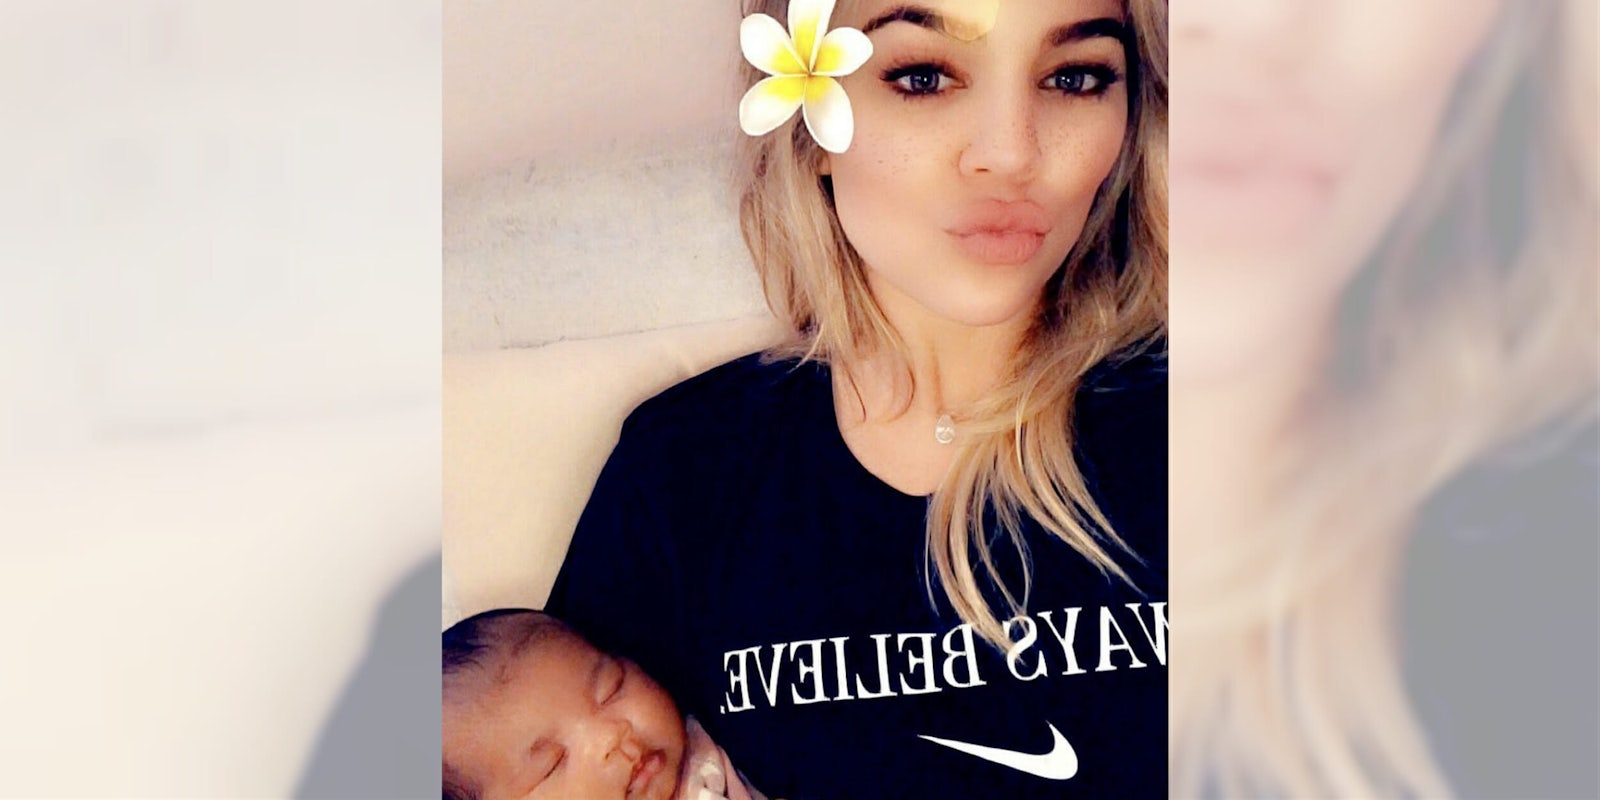 Khloe Kardashian's infant daughter True Thompson is already facing colorism at 5-months-old.